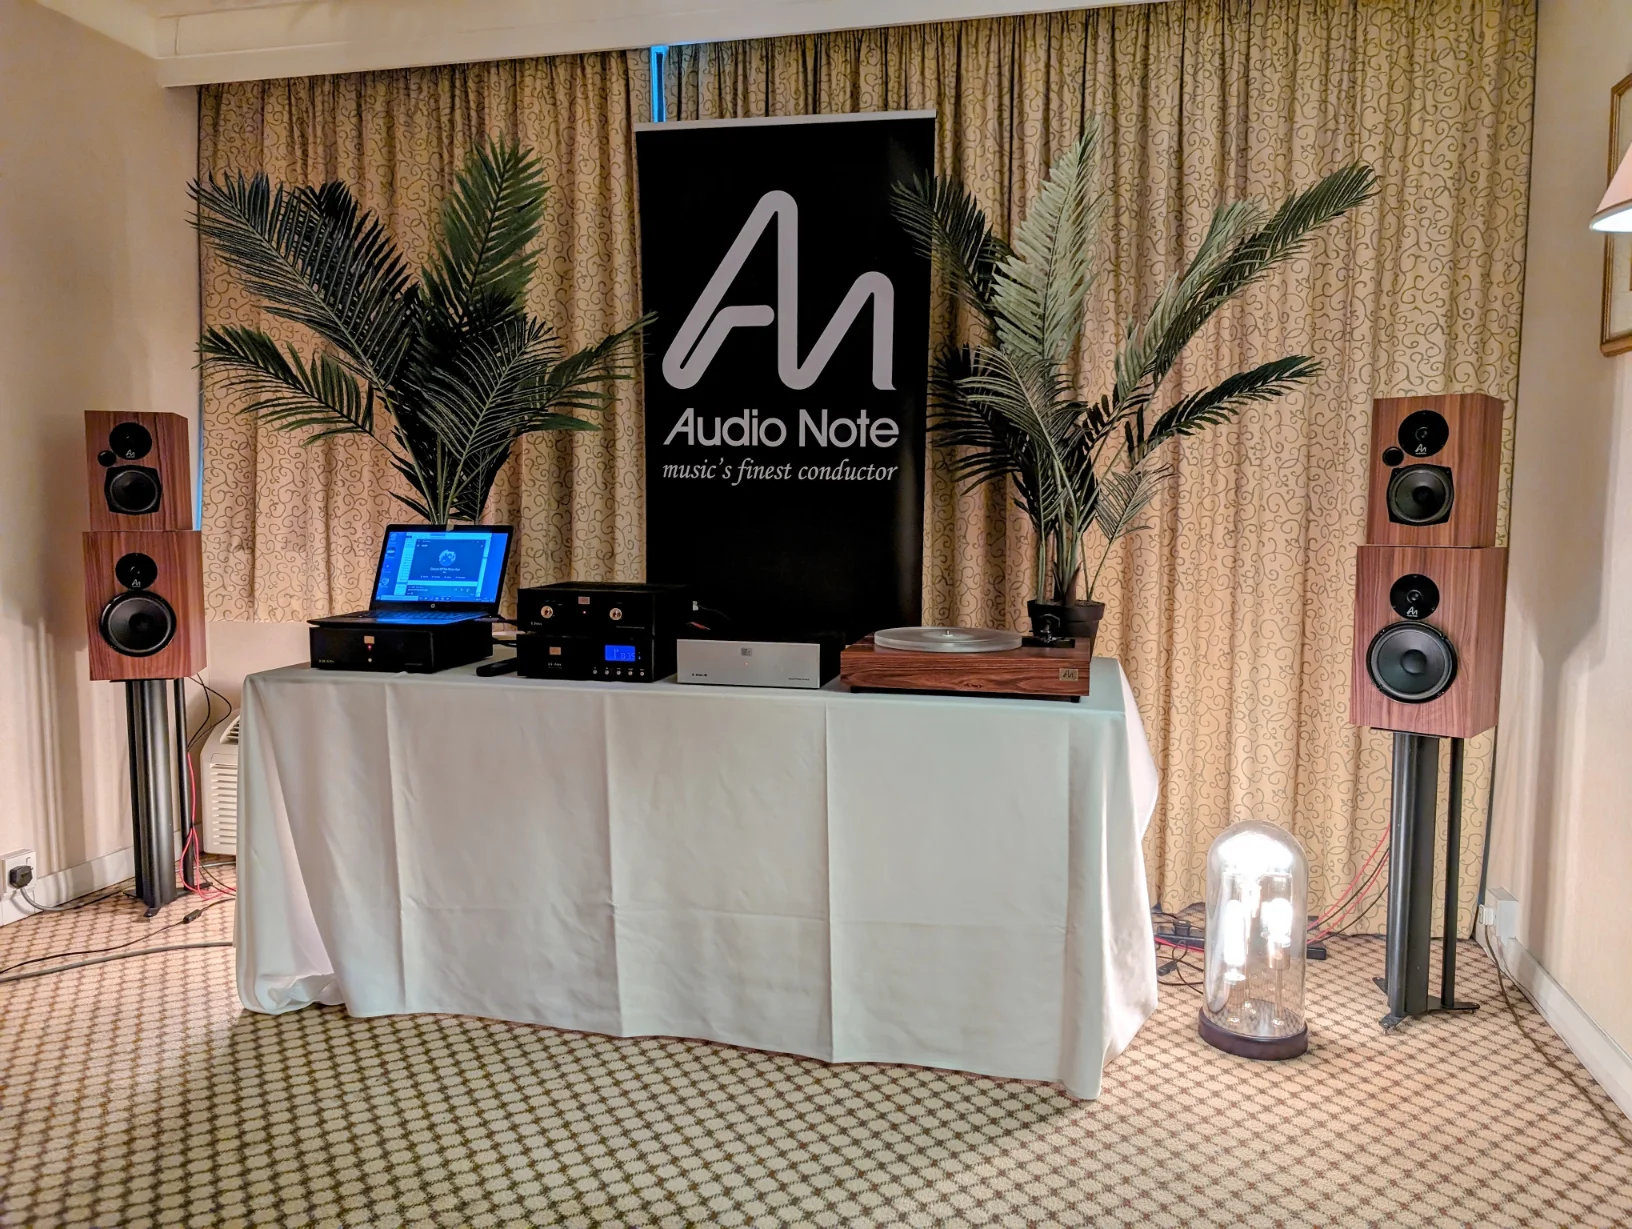 Don’t try this at home kids! I’m not sure double stacking is the best I’ve heard the Audio Note AX-One and AX-Two but appreciate the attempt . Good to see a level zero system being shown to prove you can get an Audio Note system with minimal fuss and minimal strain on the bank balance.